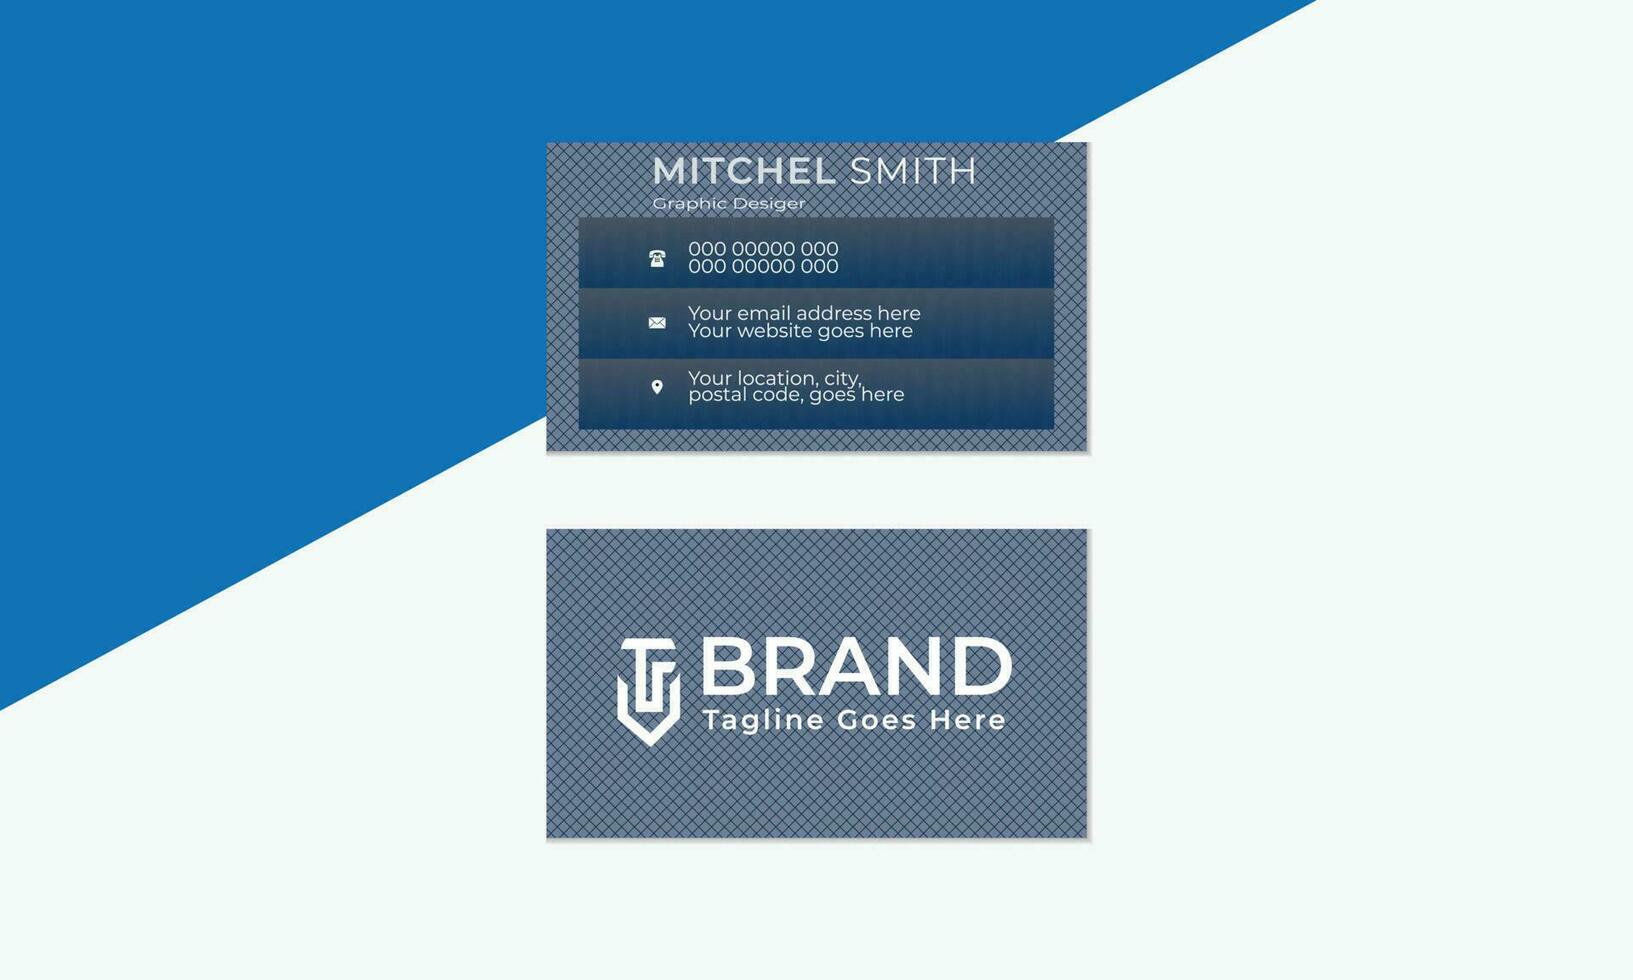 Stylish eye catching professional business card template design vector